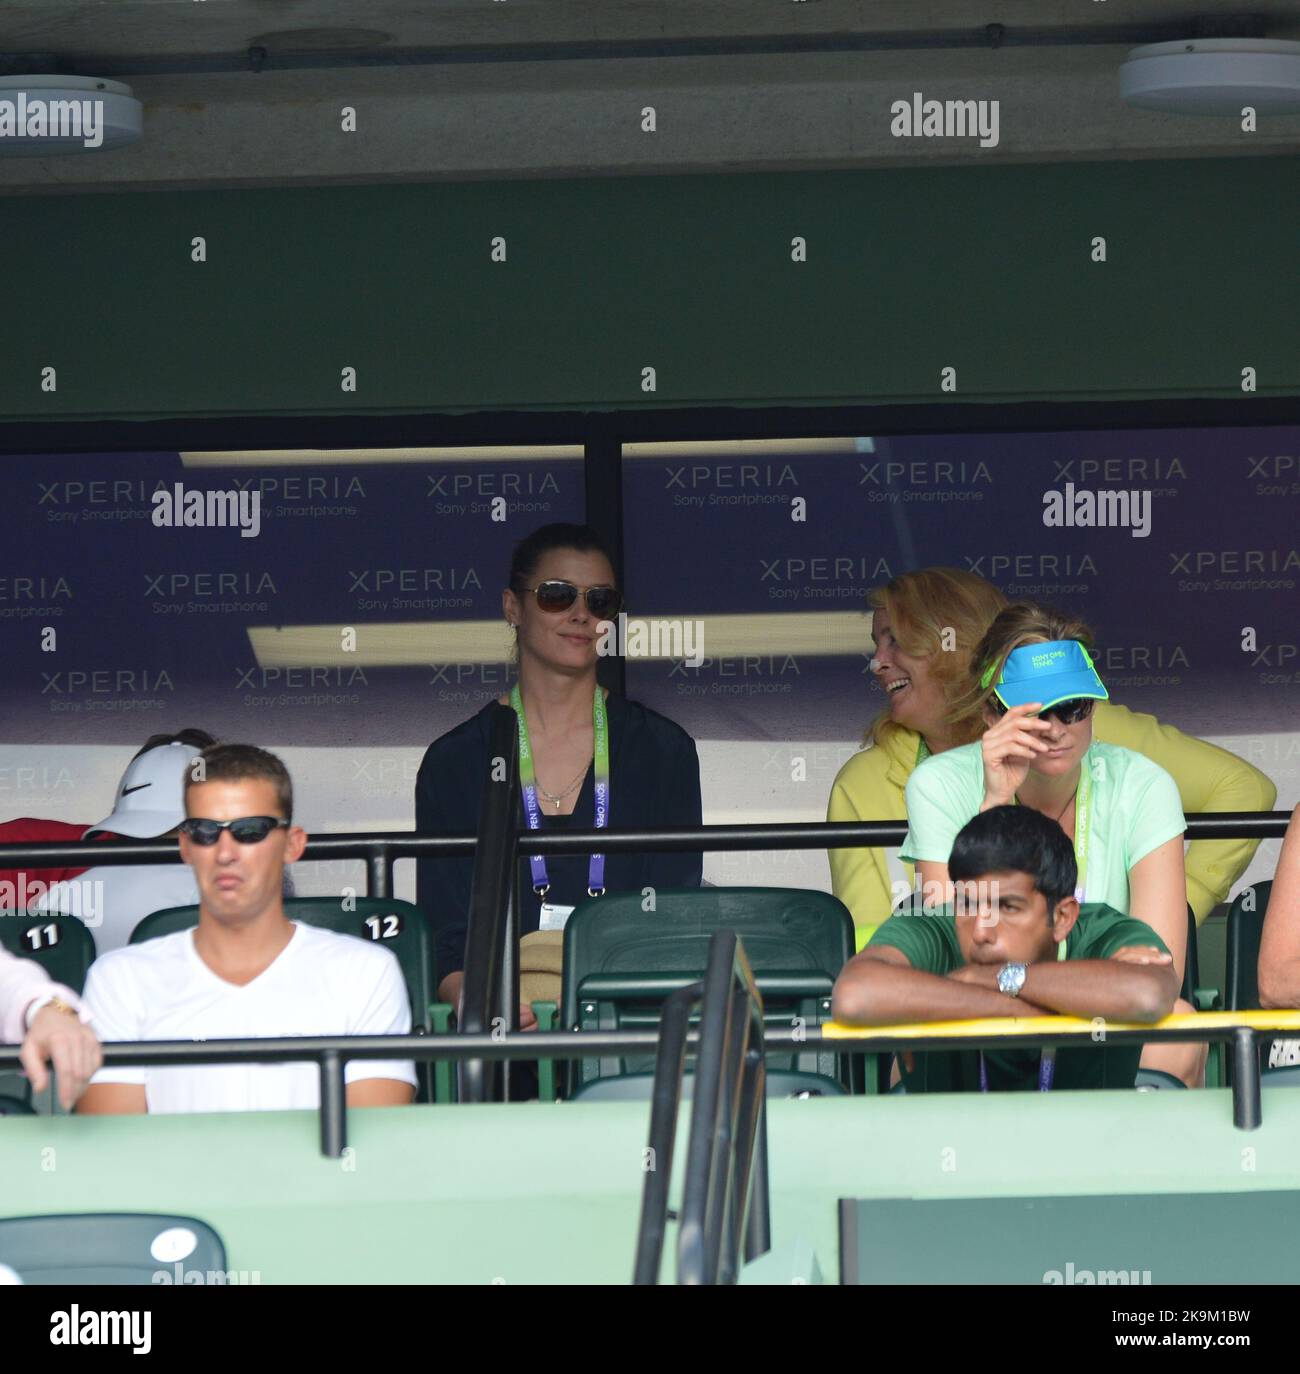 KEY BISCAYNE, FL - MARCH 24: Quarterback Tom Brady baby mama and Coyote Ugly Actress Bridget Moynahan and son Jack Brady day 7 at the Sony Open at Crandon Park Tennis Center. Kathryn Bridget Moynahan (born April 28, 1970, known as Bridget Moynahan, is an American model and actress on March 24, 2013 in Key Biscayne, Florida. People: Bridget Moynahan Jack Brady Credit: Storms Media Group/Alamy Live News Stock Photo